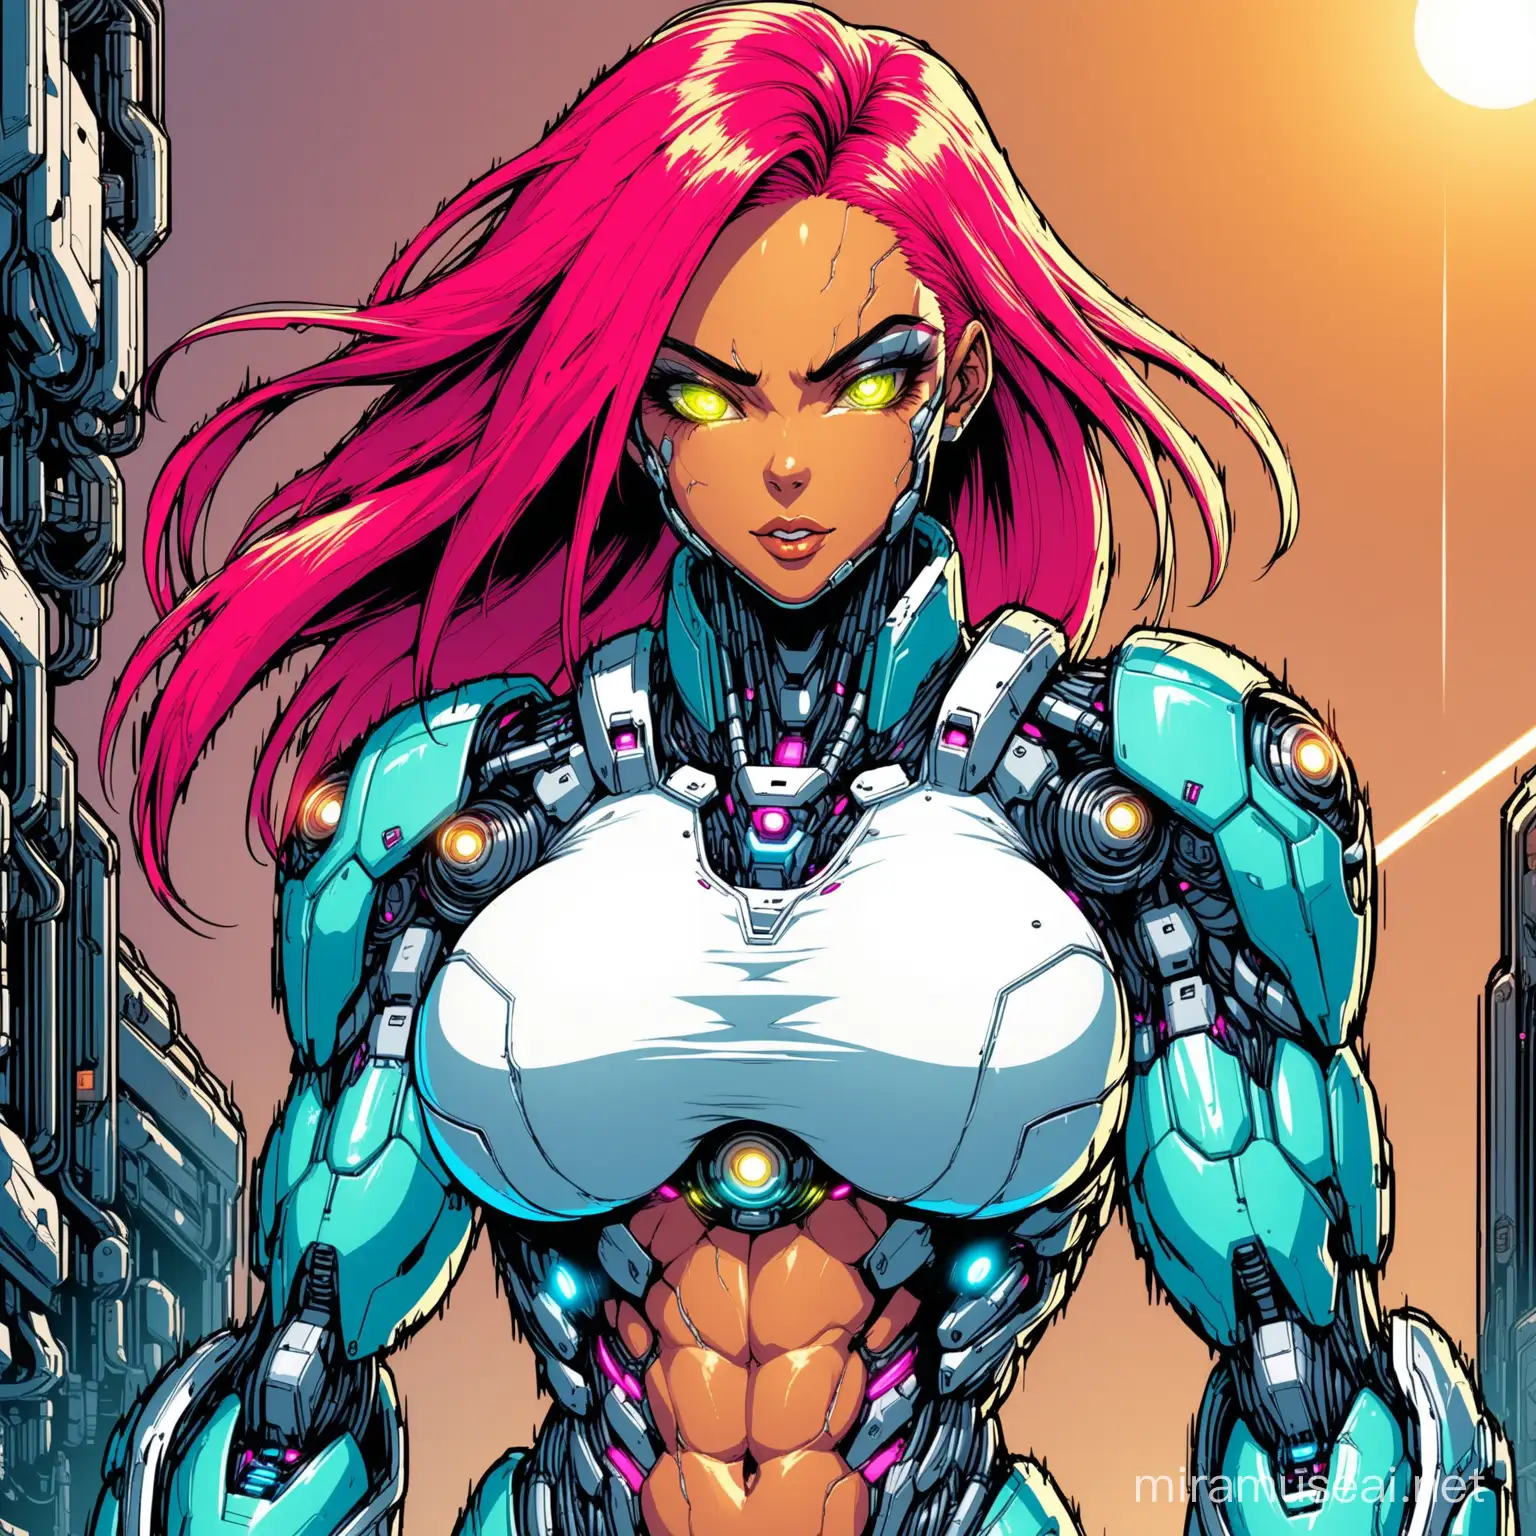 Futuristic Cyber Girl with Vibrant Hair and Enhanced Physique